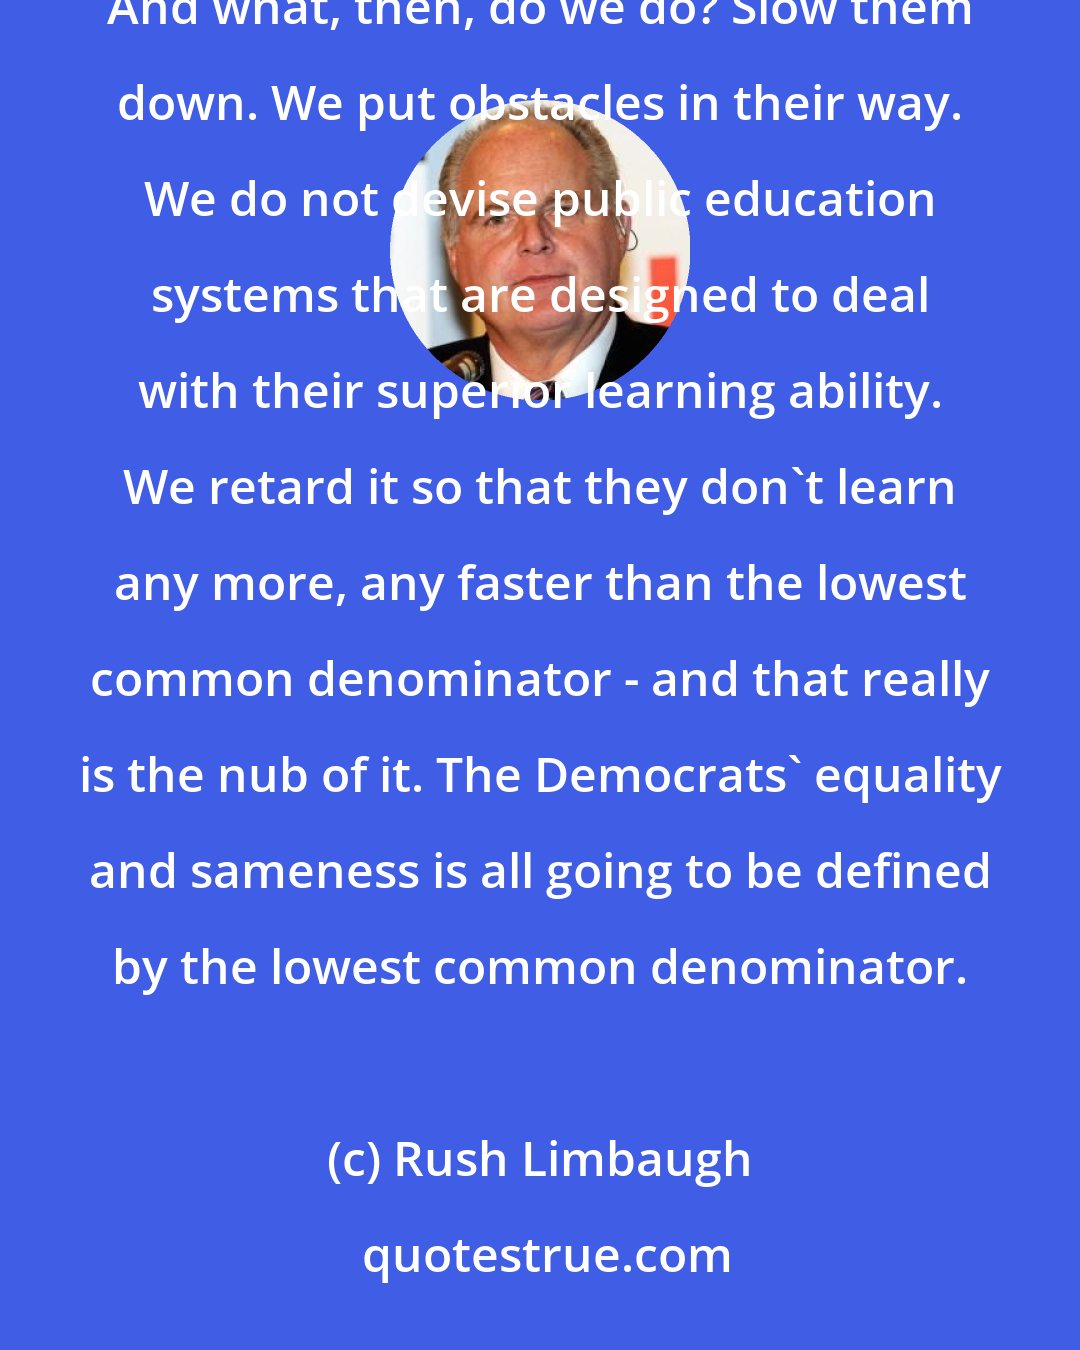 Rush Limbaugh: If you take a look at education, the kids that get good grades are said to humiliate those who don't. And what, then, do we do? Slow them down. We put obstacles in their way. We do not devise public education systems that are designed to deal with their superior learning ability. We retard it so that they don't learn any more, any faster than the lowest common denominator - and that really is the nub of it. The Democrats' equality and sameness is all going to be defined by the lowest common denominator.